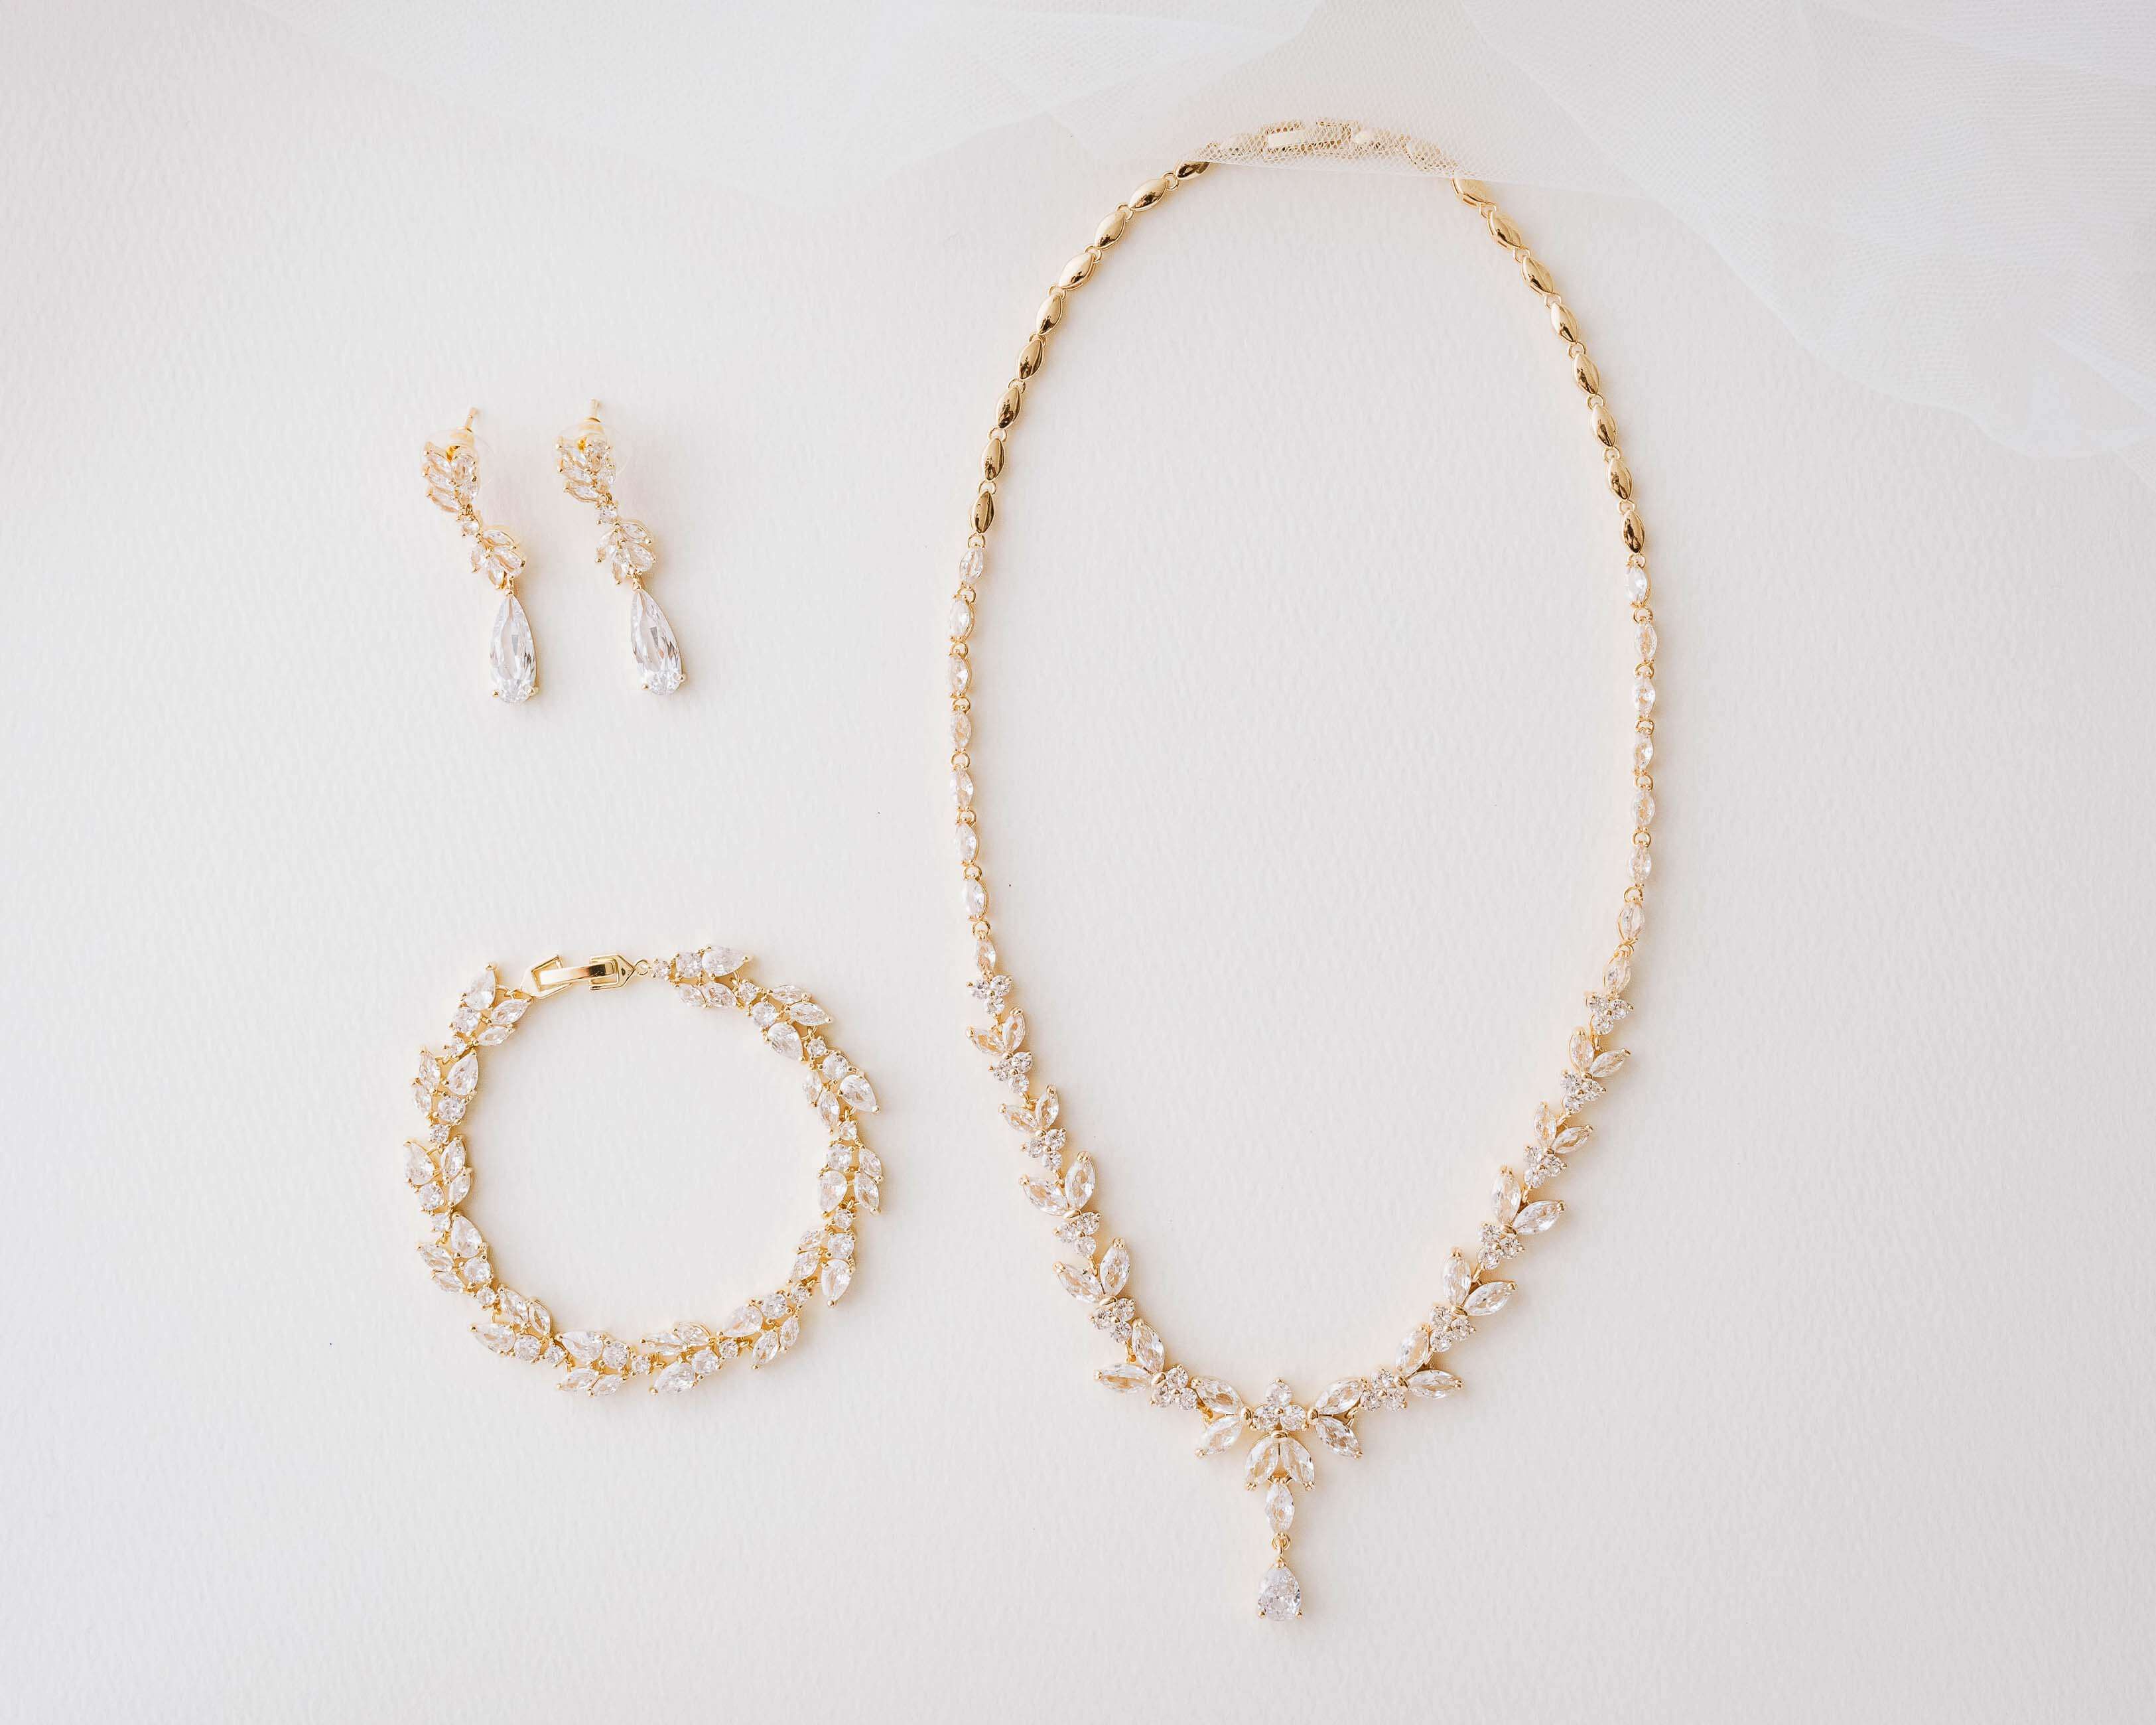 Gold Wedding Jewelry Set - The perfect Bridal Accessories.